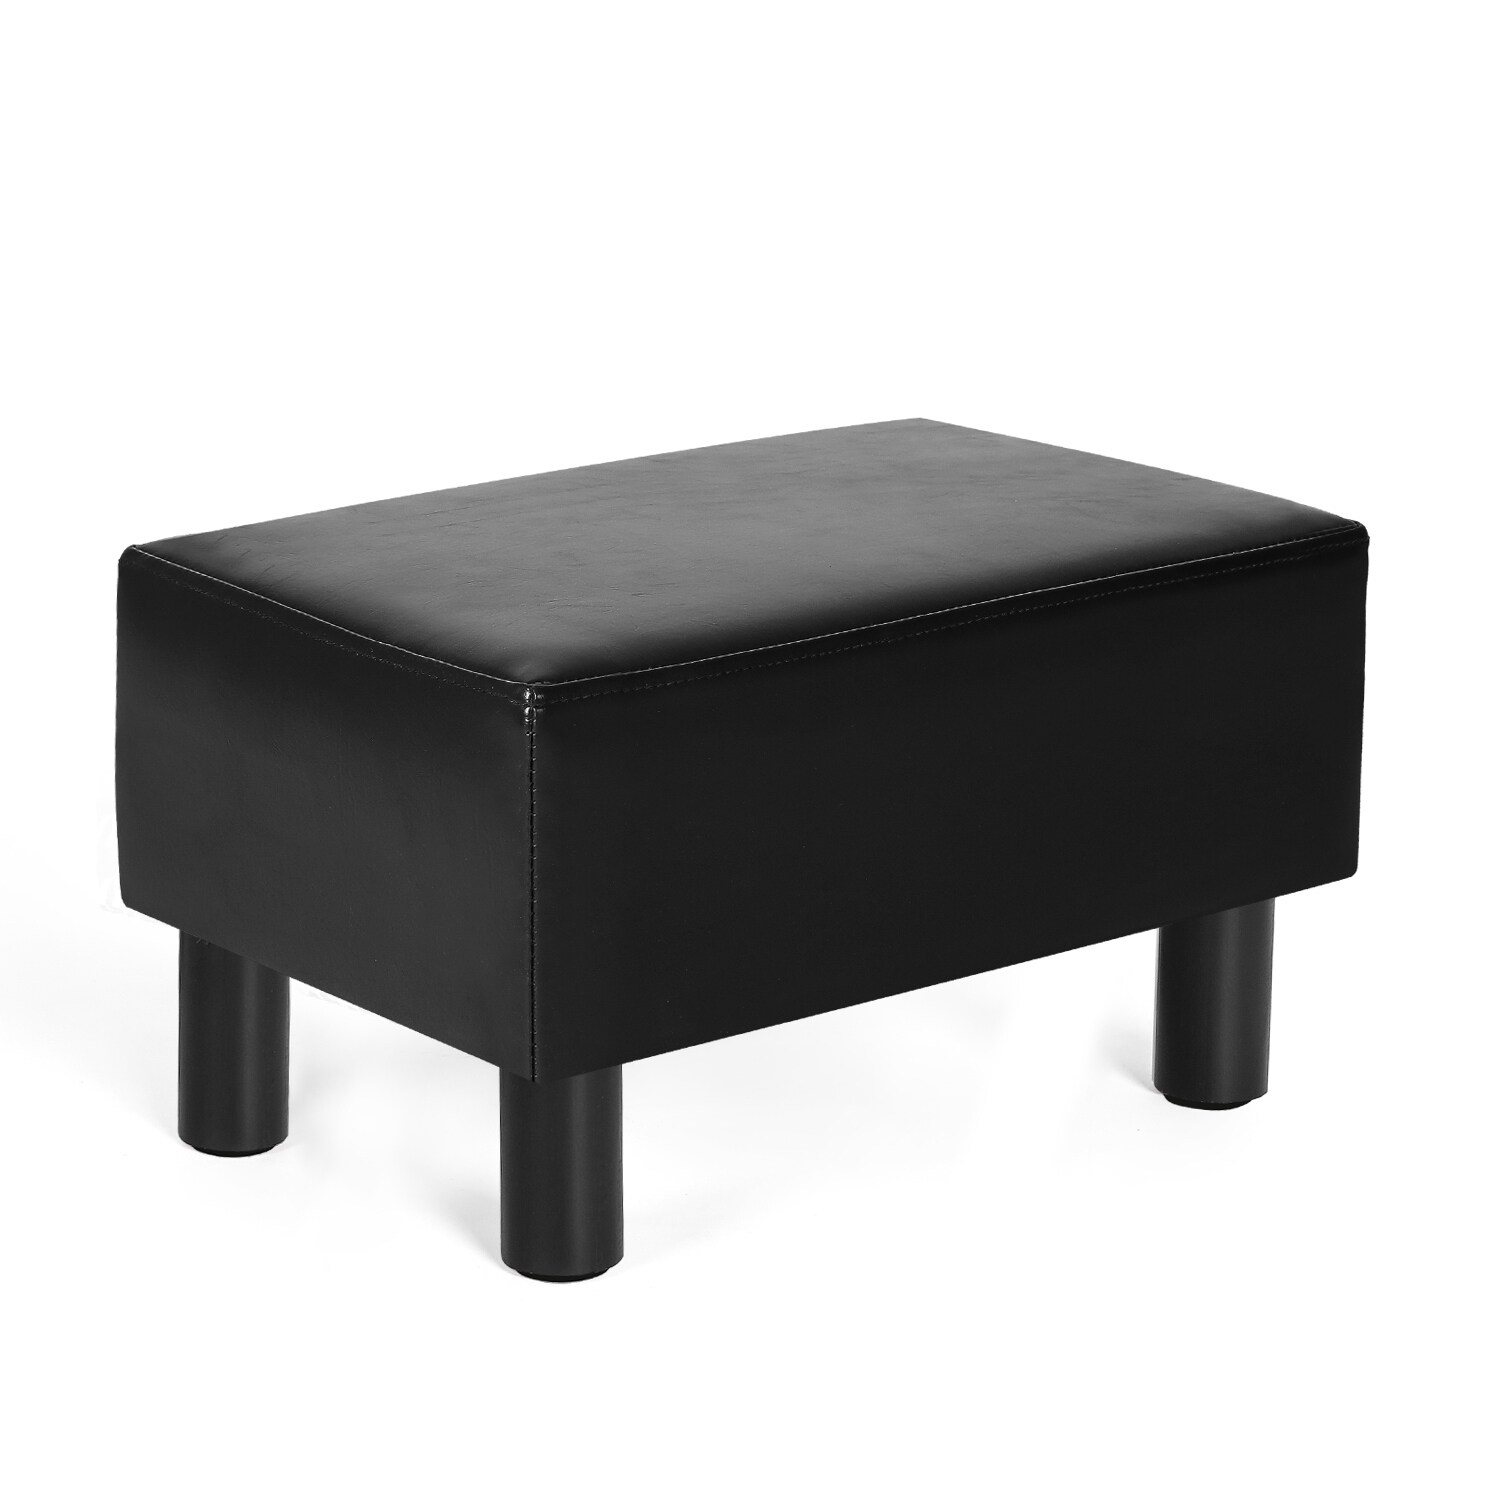 https://ak1.ostkcdn.com/images/products/is/images/direct/09d06273f93150cbf46659f08bd5626367c30593/Adeco-Footstool-Ottoman-Faux-Leather-Foot-Rest-Stool.jpg